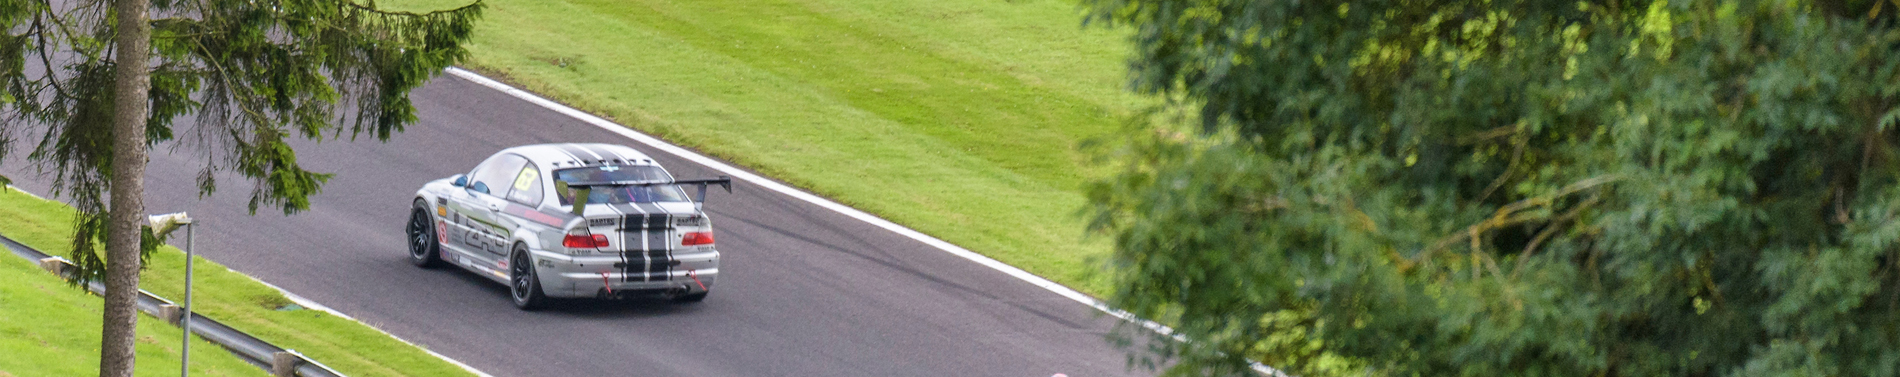 Allcomers Races - Cadwell Park 21st July